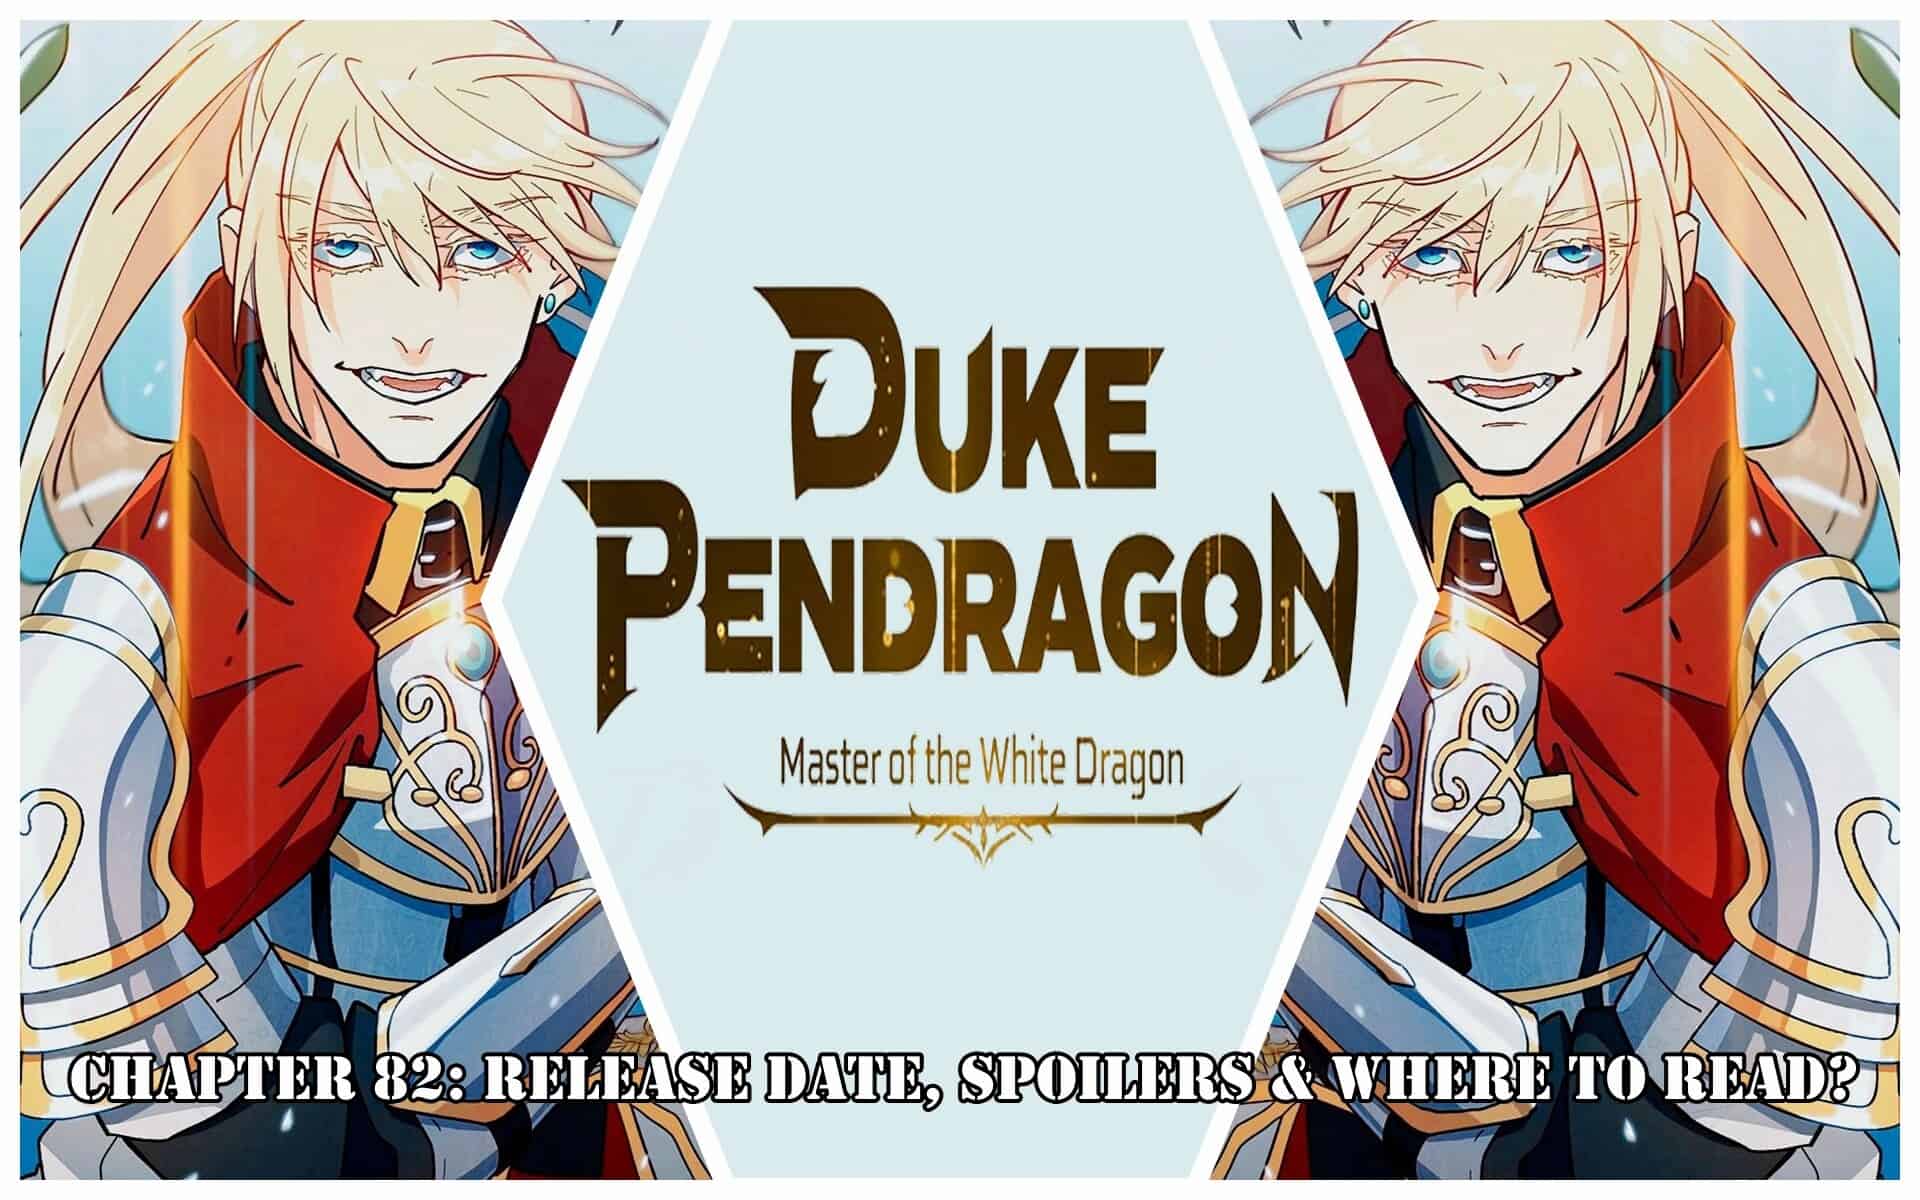 Duke Pendragon Chapter 82: Release Date, Spoilers & Where to Read?